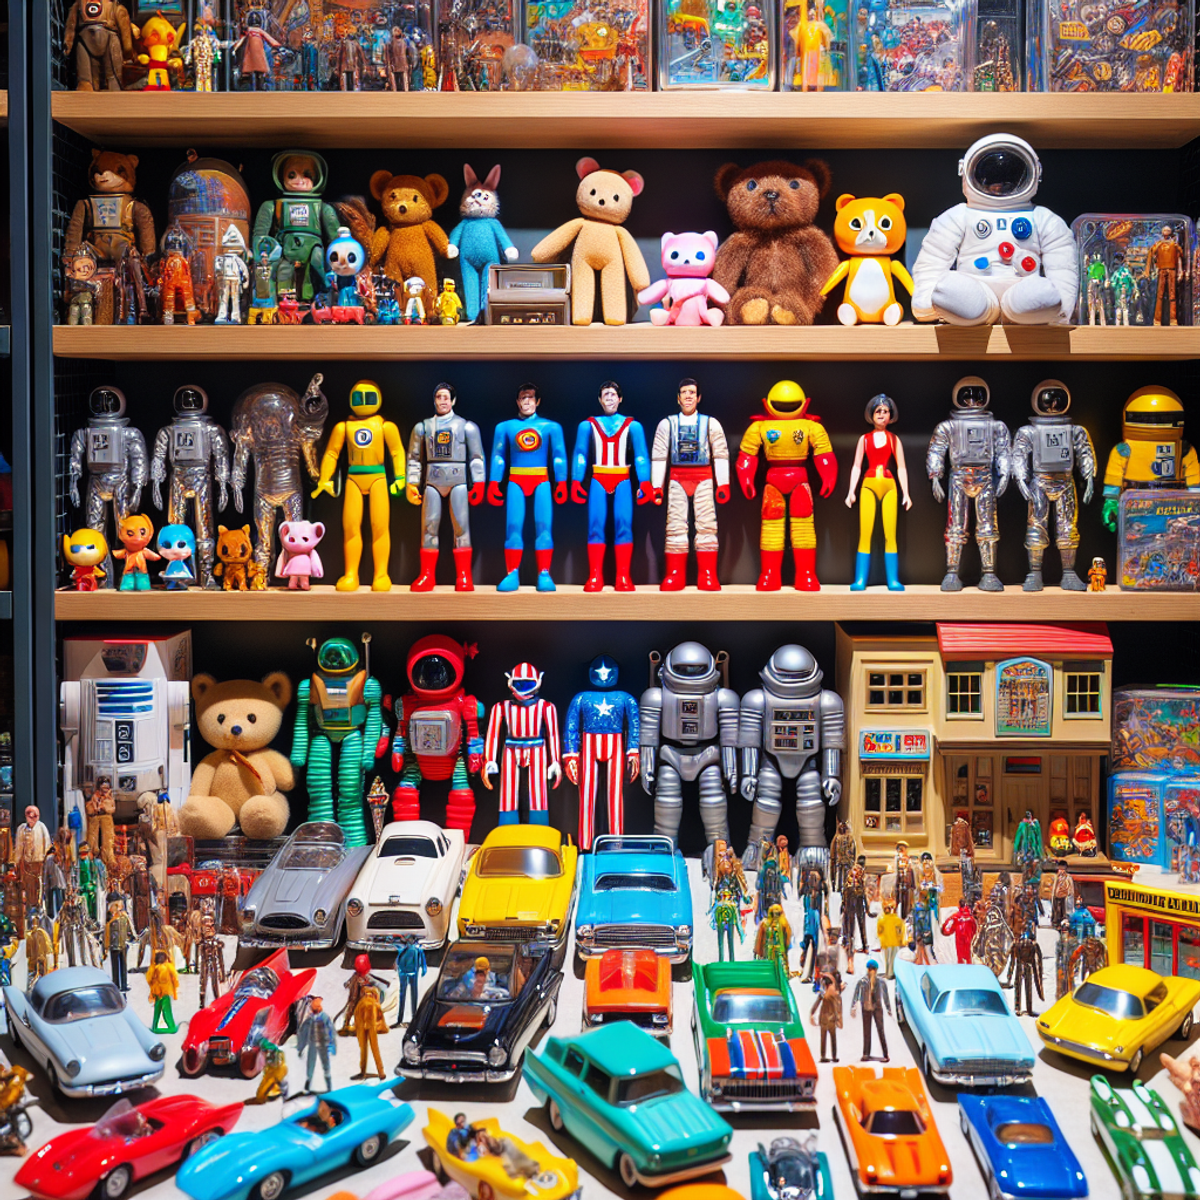 Assorted action figures, plushies, race cars, dollhouses, and astronaut models on a shelf.